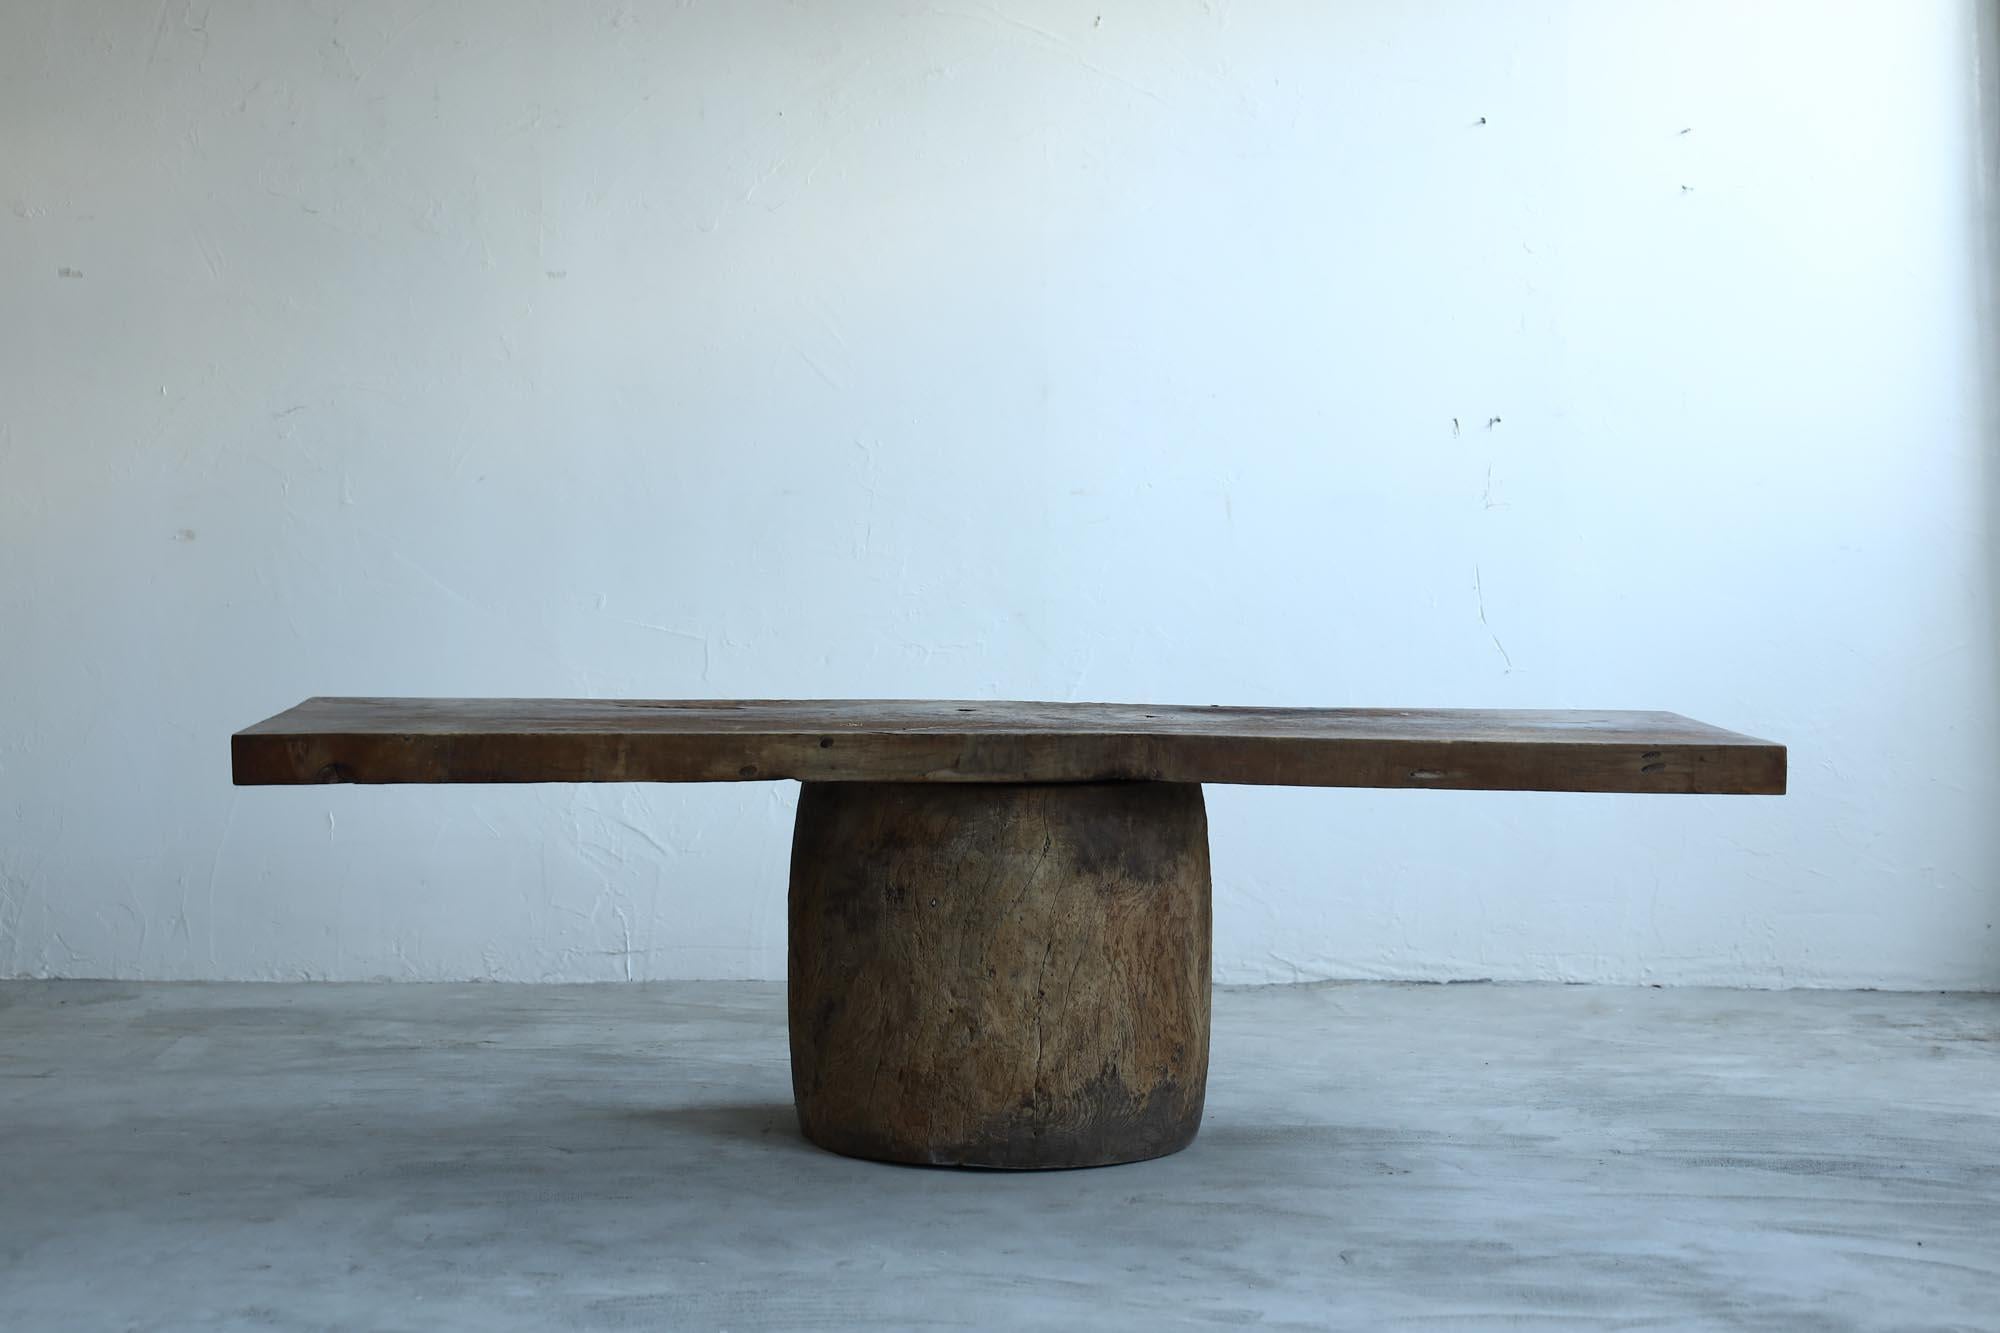 Very old Japanese primitive style table.
Simple design with a single board on a stump.

The board is made of tochi (Japanese horse chestnut).
The stump is zelkova.
Each material itself is very unique and extremely rare.

The top board is a single